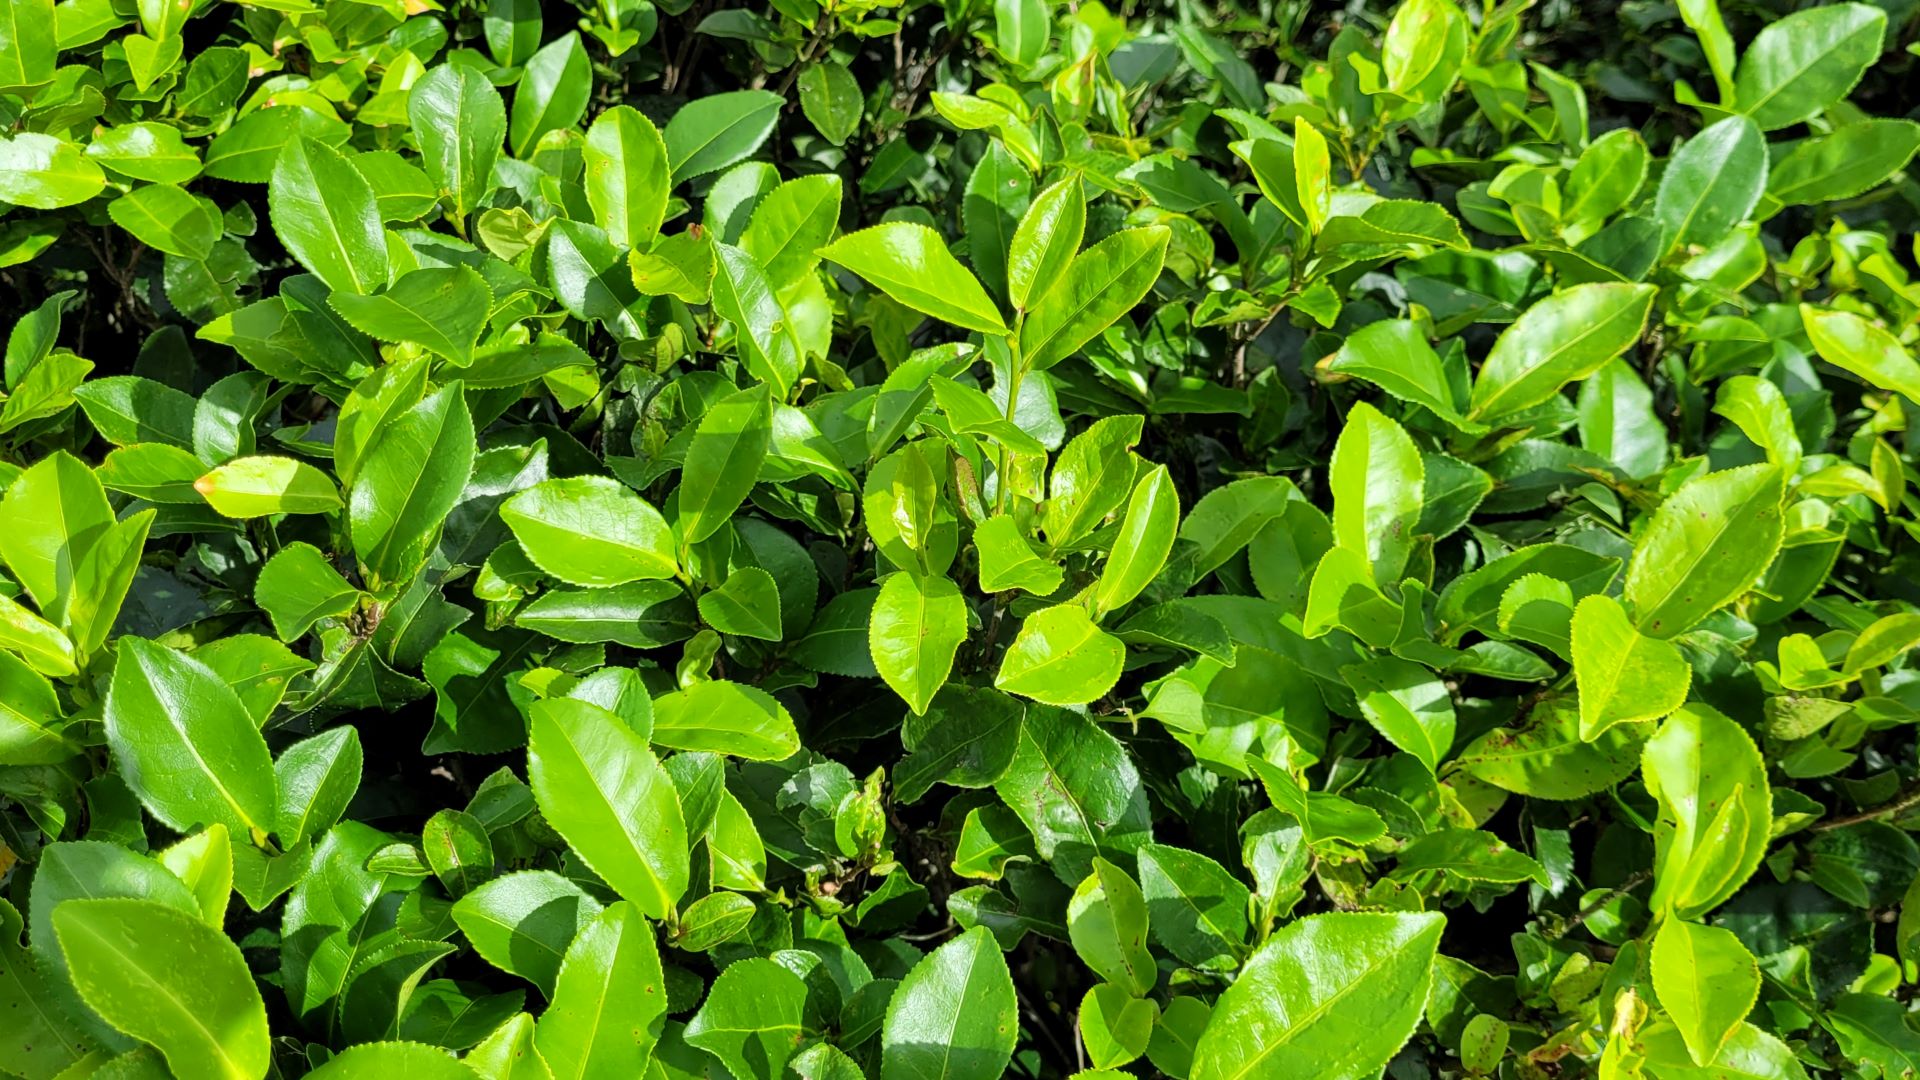 Camellia sinensis, or tea, grows in a belt around the equator.